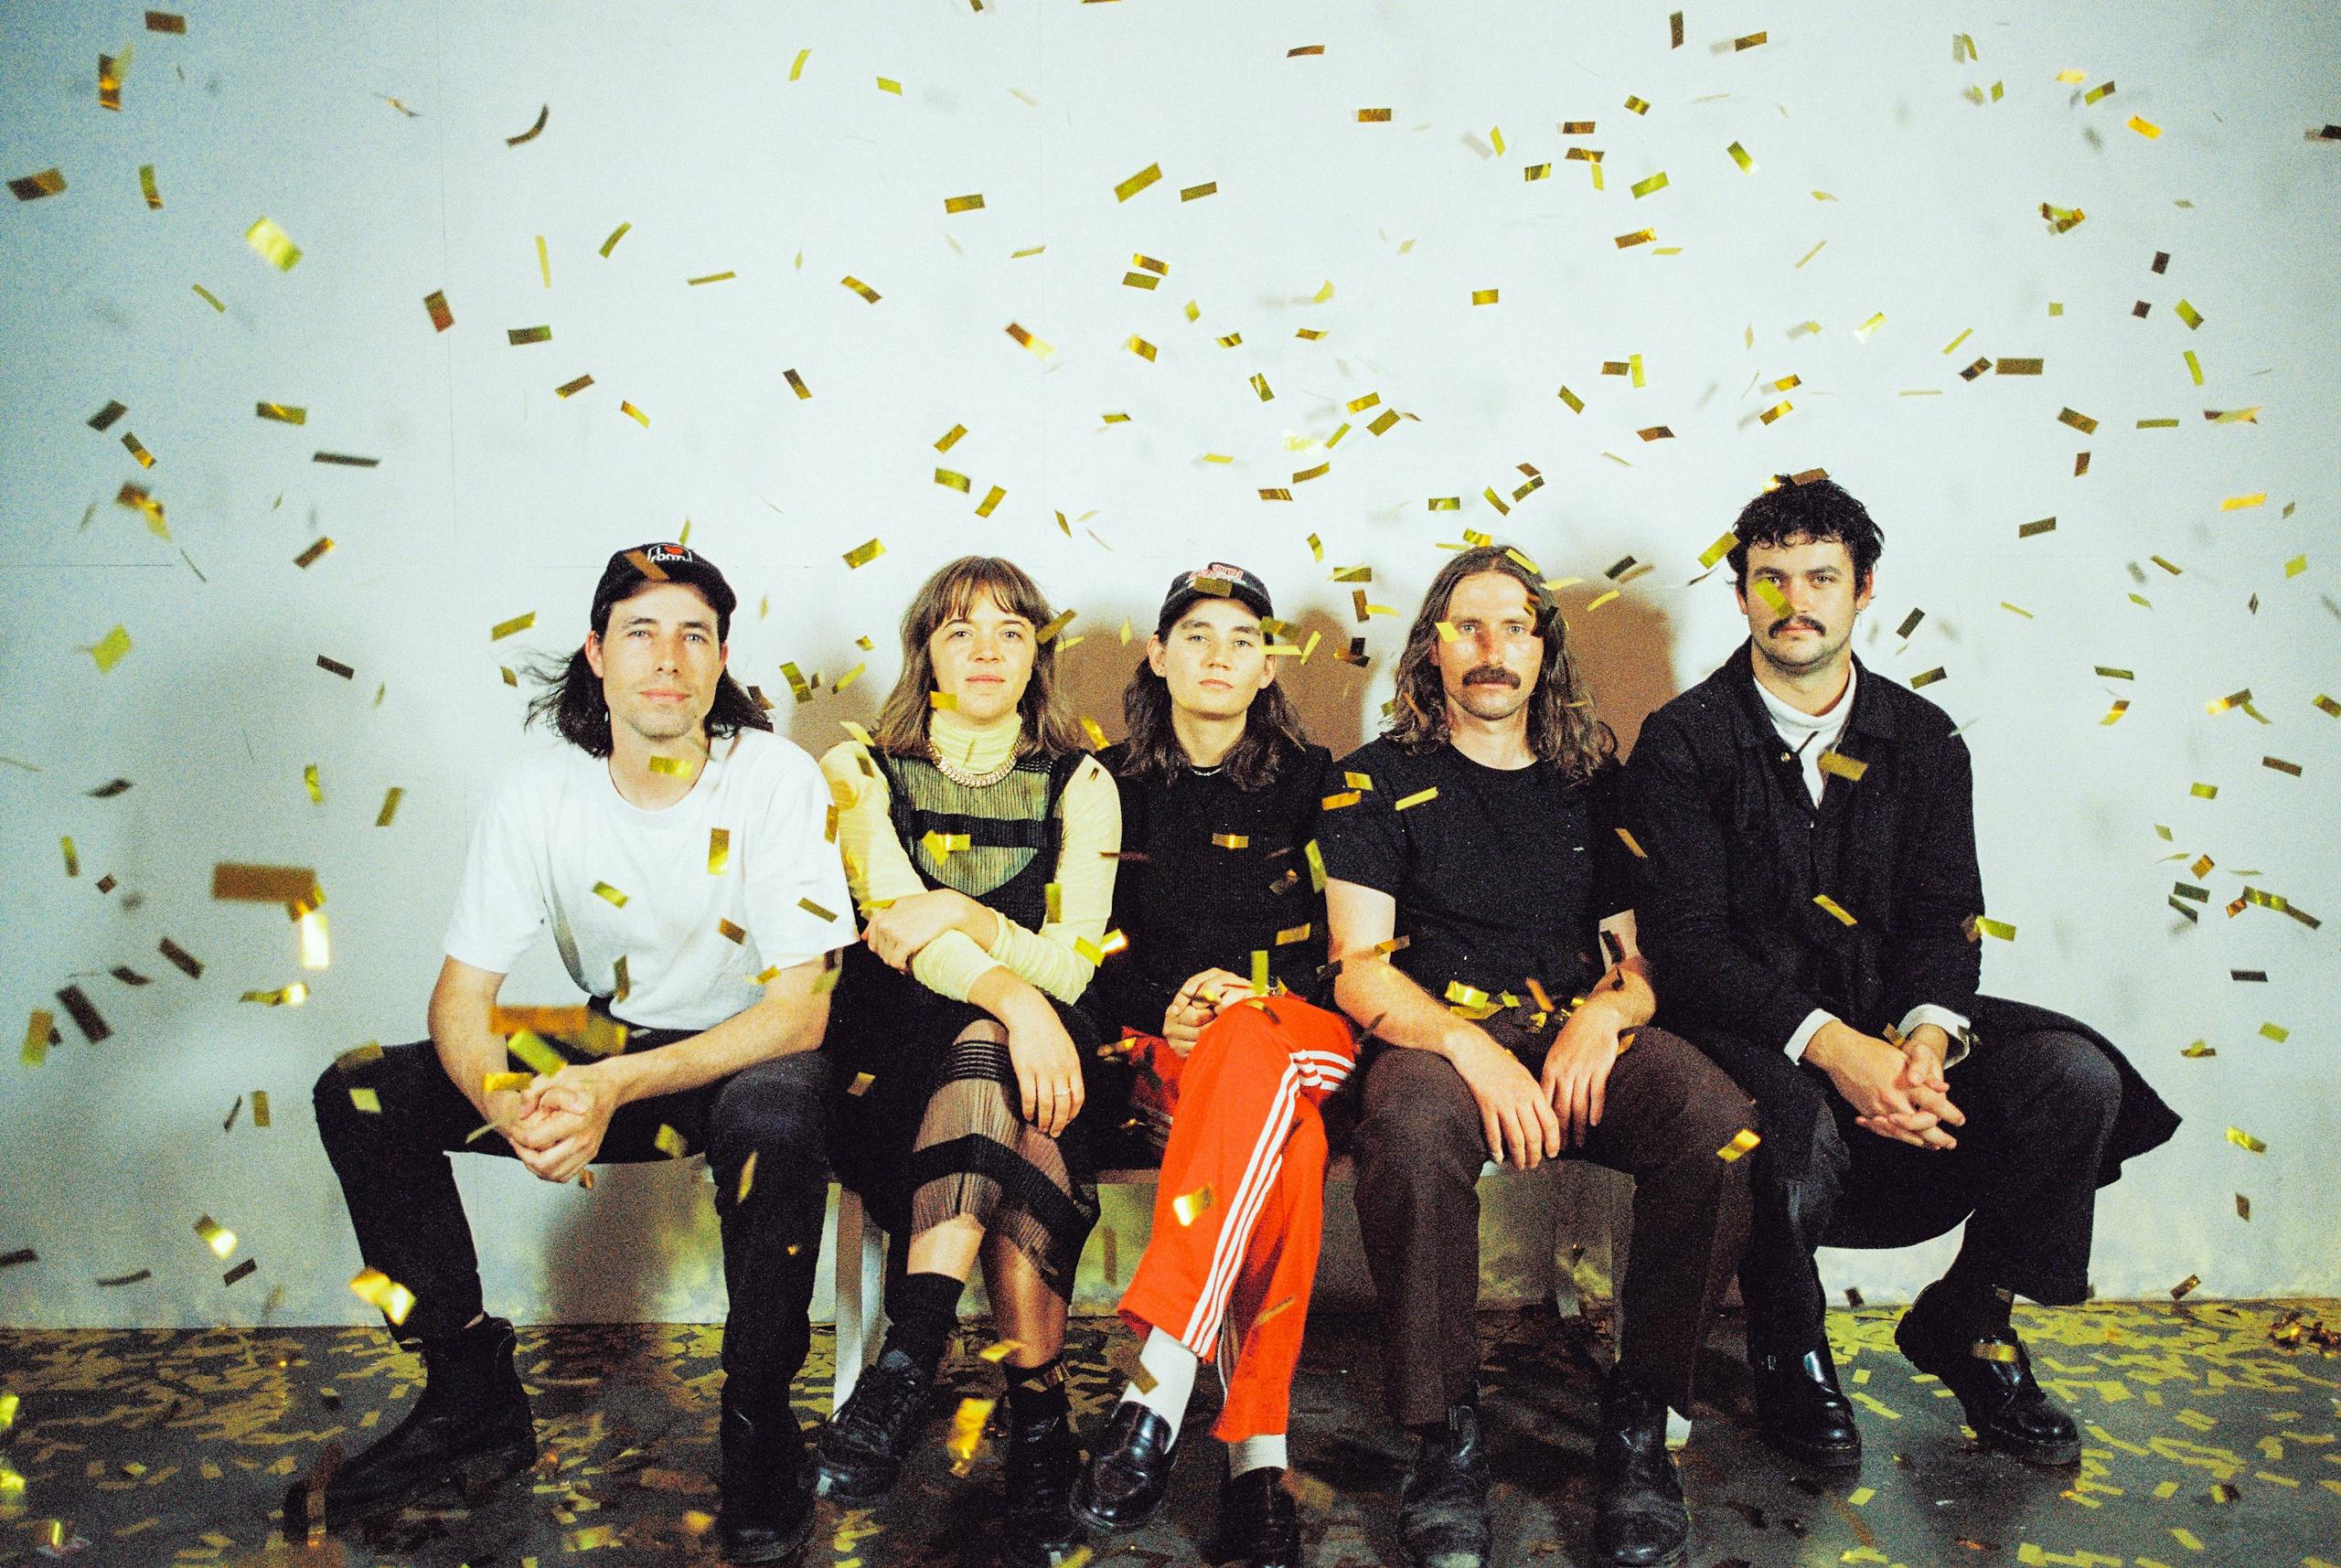 A band sitting with gold confetti raining down